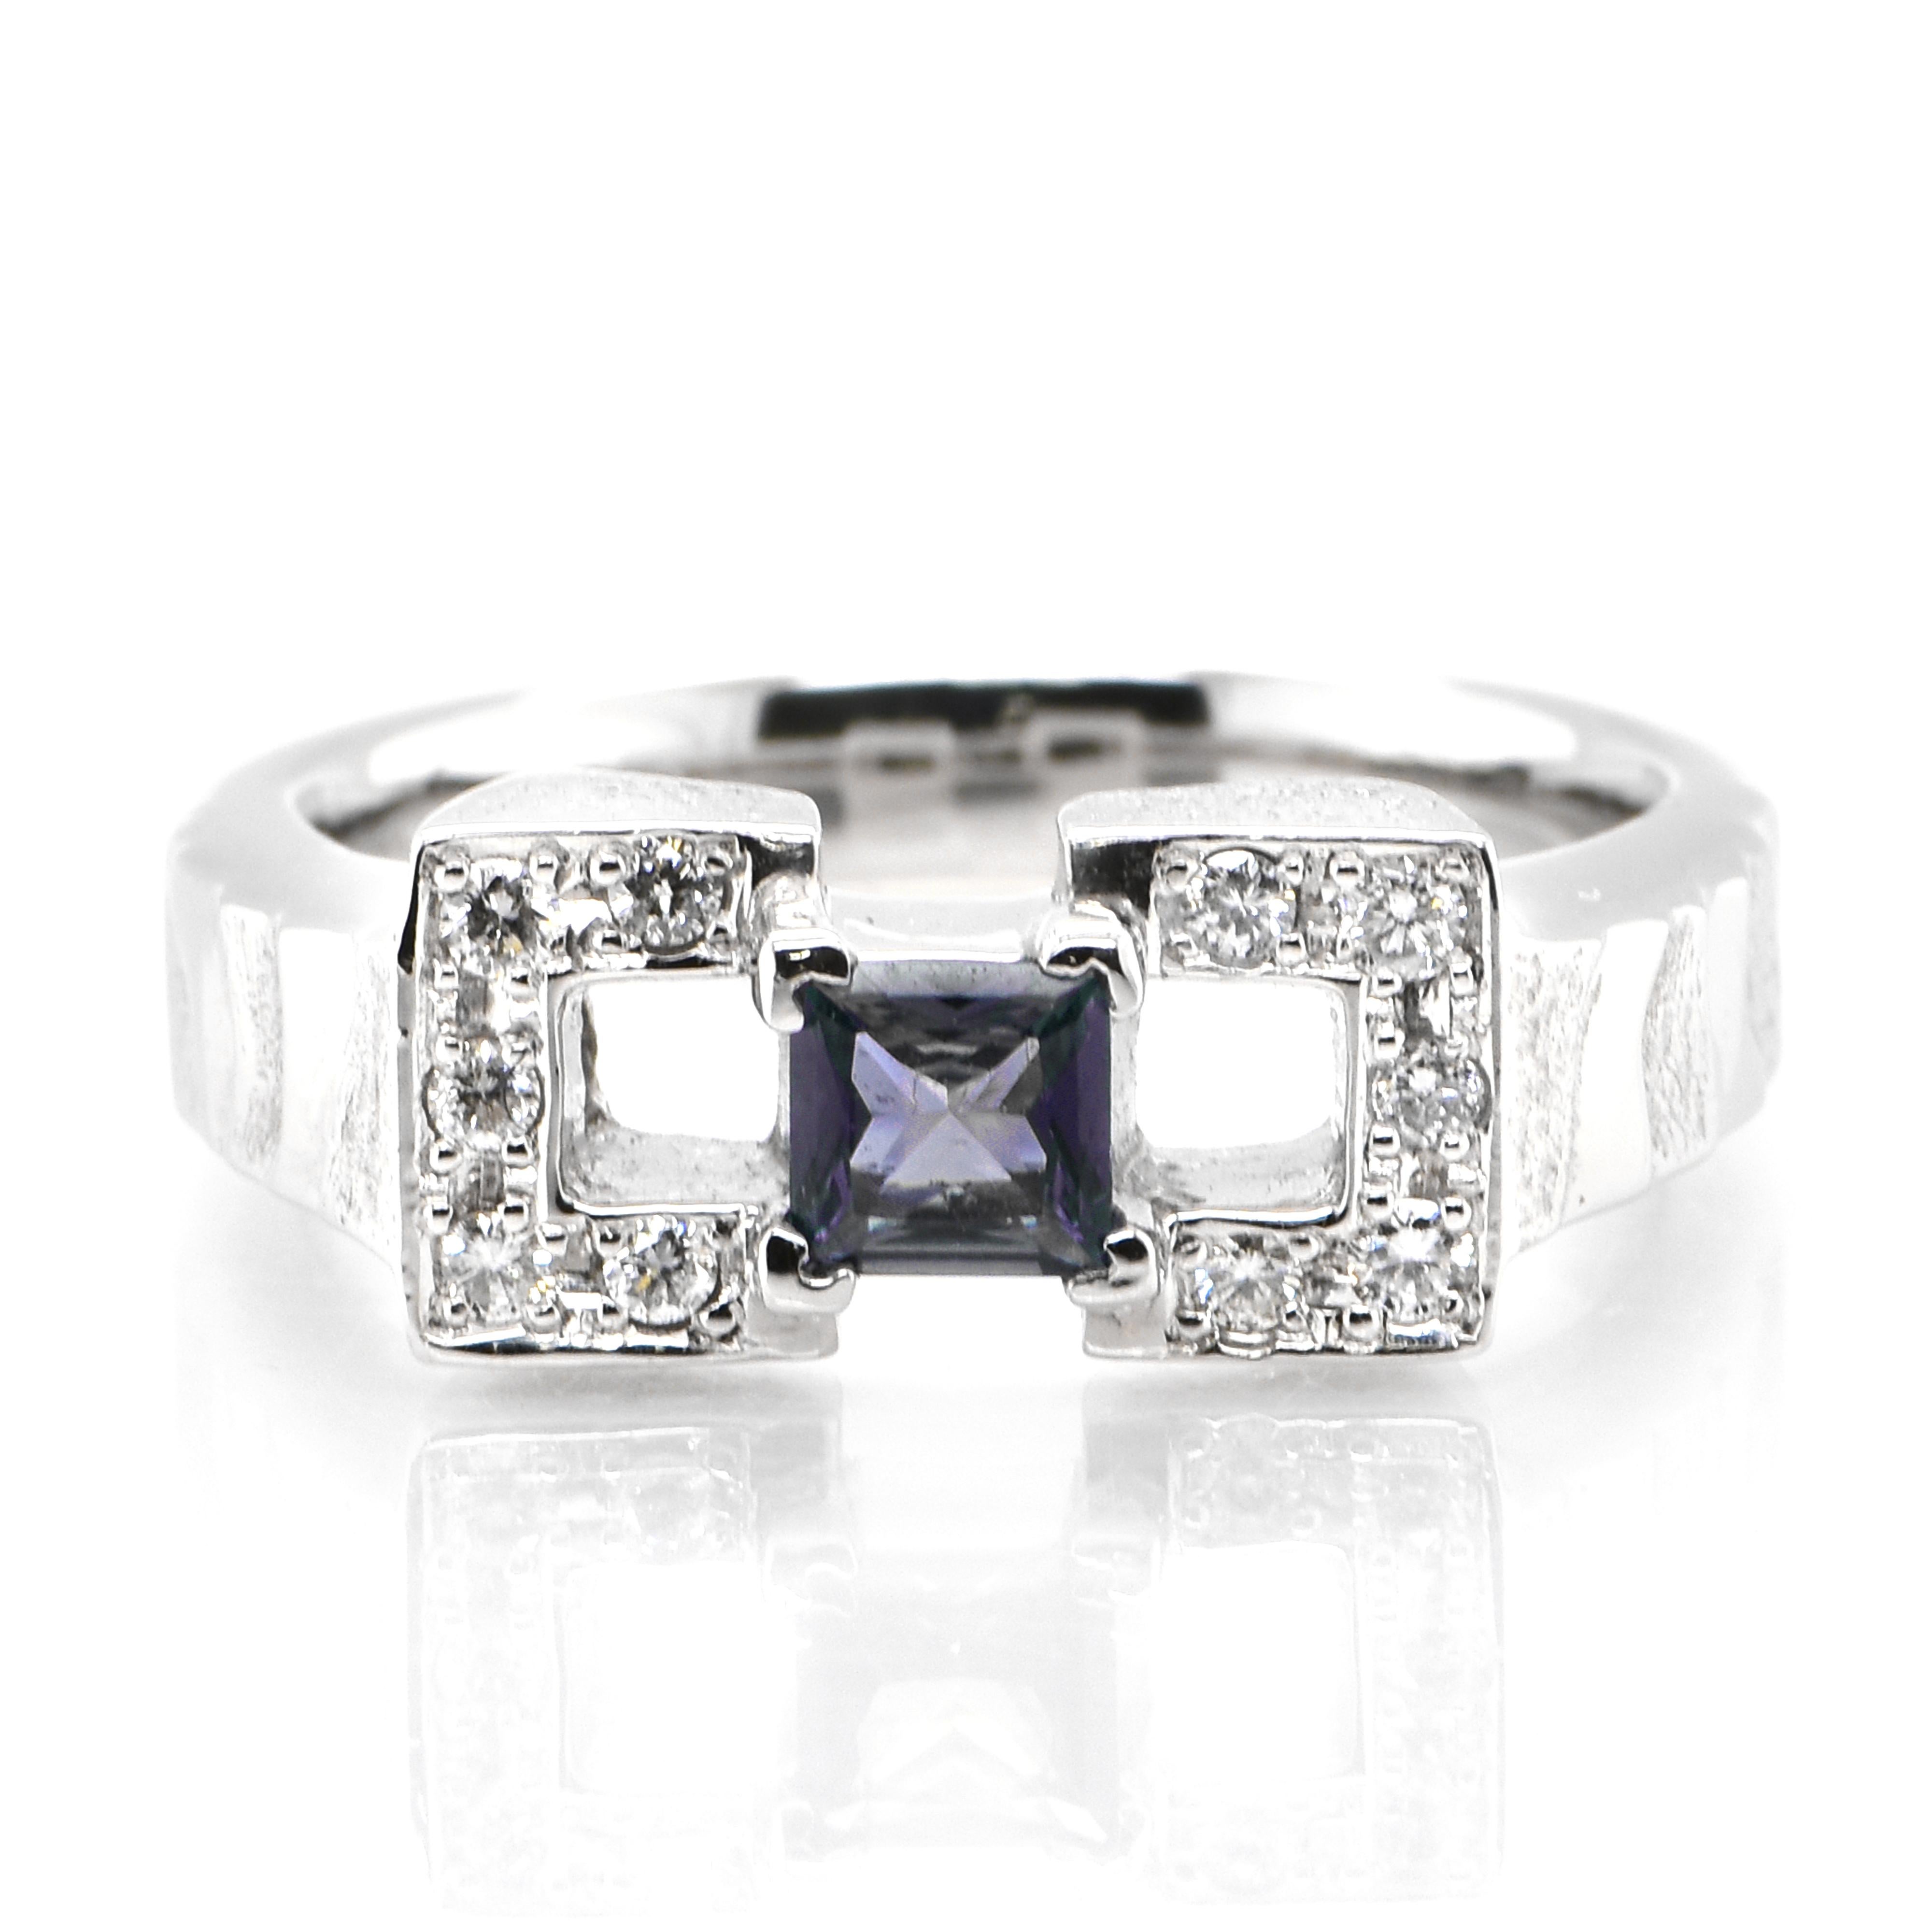 A gorgeous ring featuring 0.66 Carat, Natural Alexandrite and 0.17 Carats of Diamond Accents set in Platinum. Alexandrites produce a natural color-change phenomenon as they exhibit a Bluish Green Color under Fluorescent Light whereas a Purplish Red